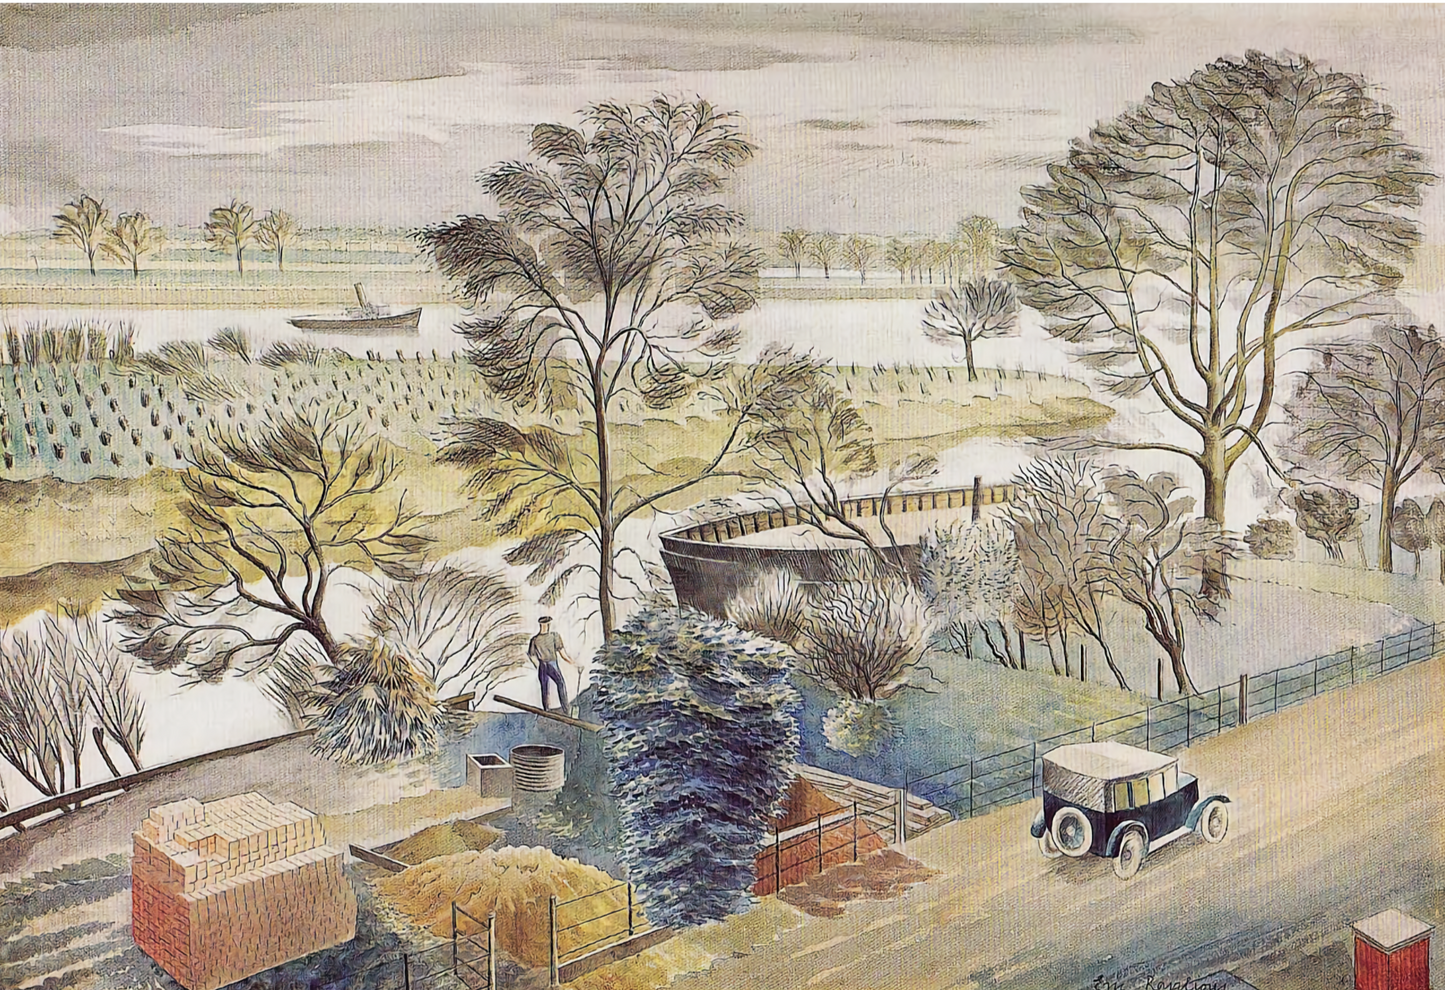 River Thames, Chiswick Eyot by Eric Ravilious, 1933 - Postcard